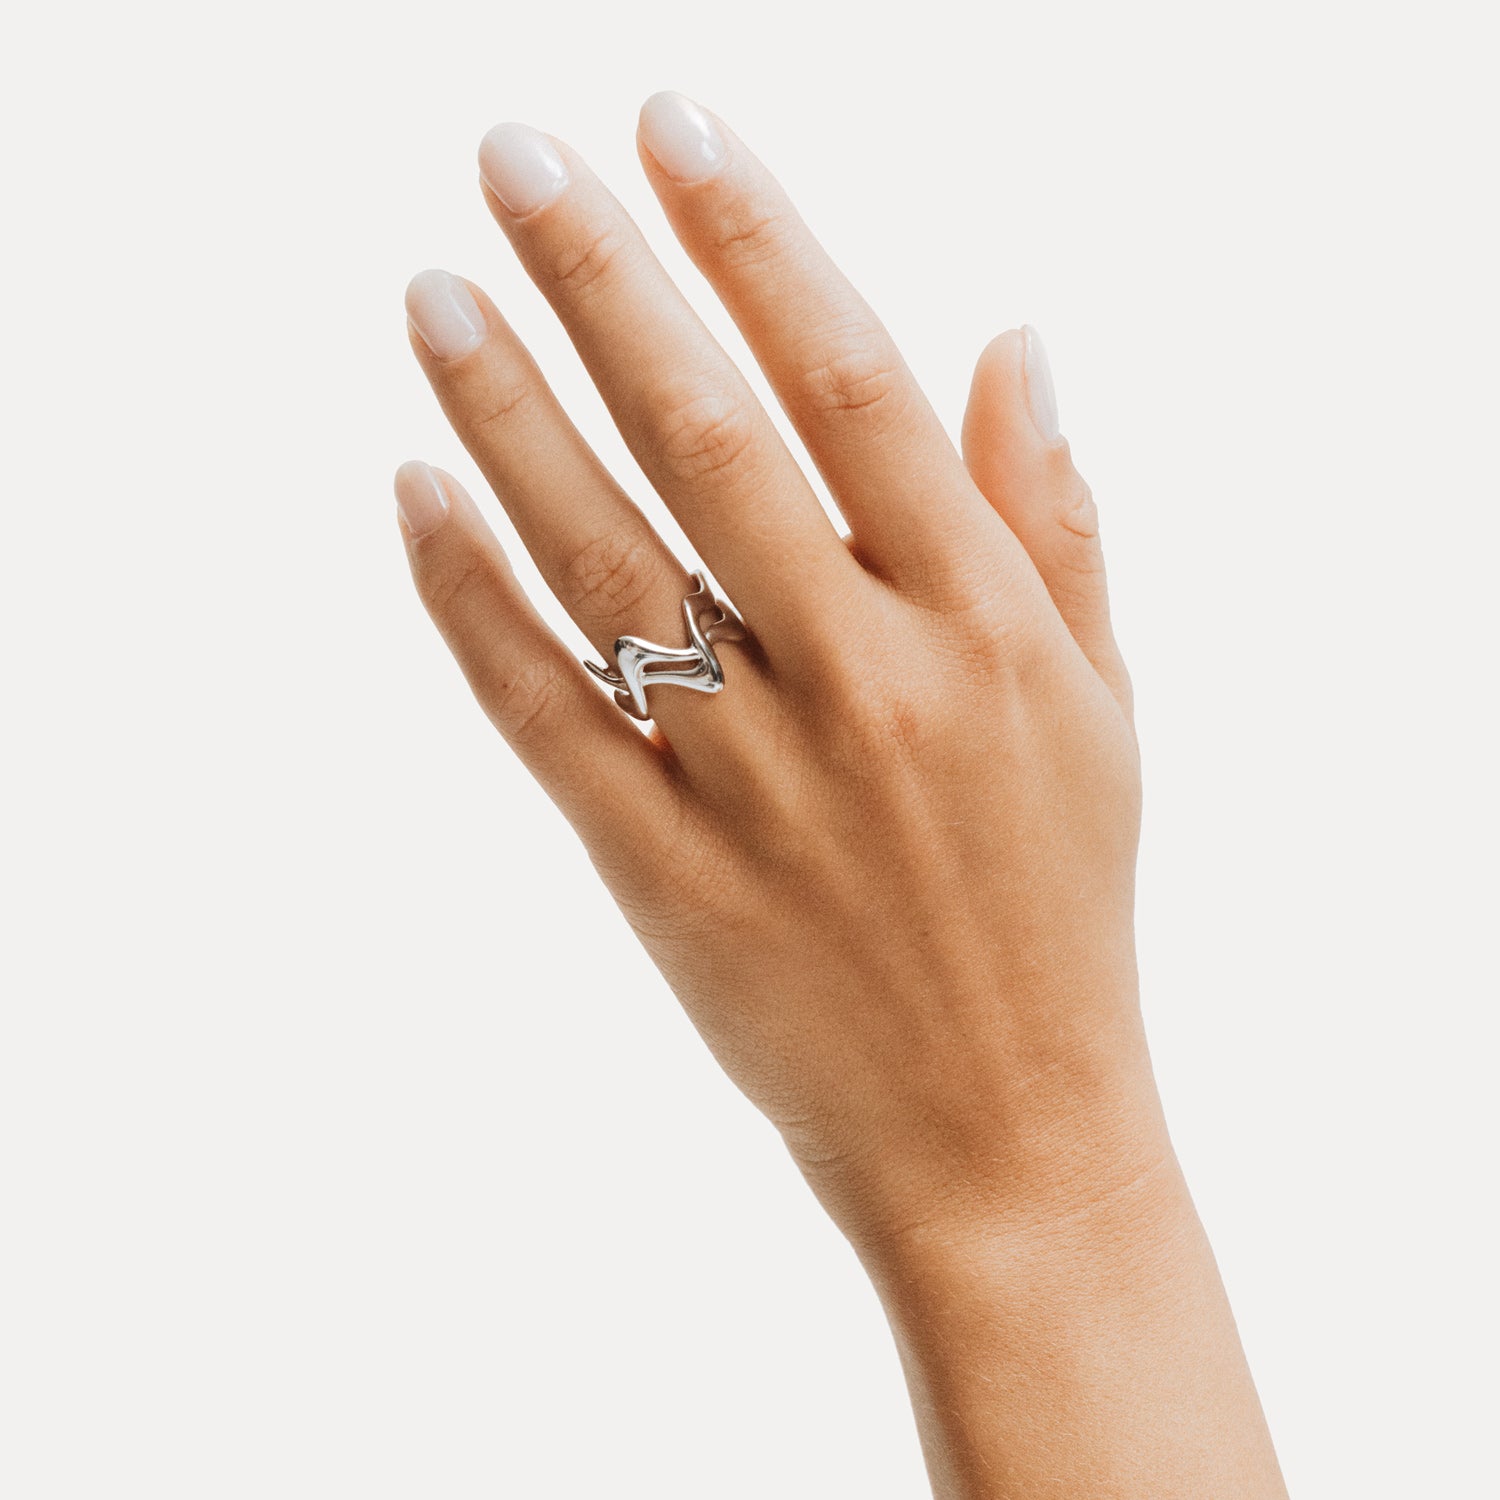 Poise Double Pre-Stacked Ring, recycled Sterling Silver, shown on hand - VEYIA Berlin